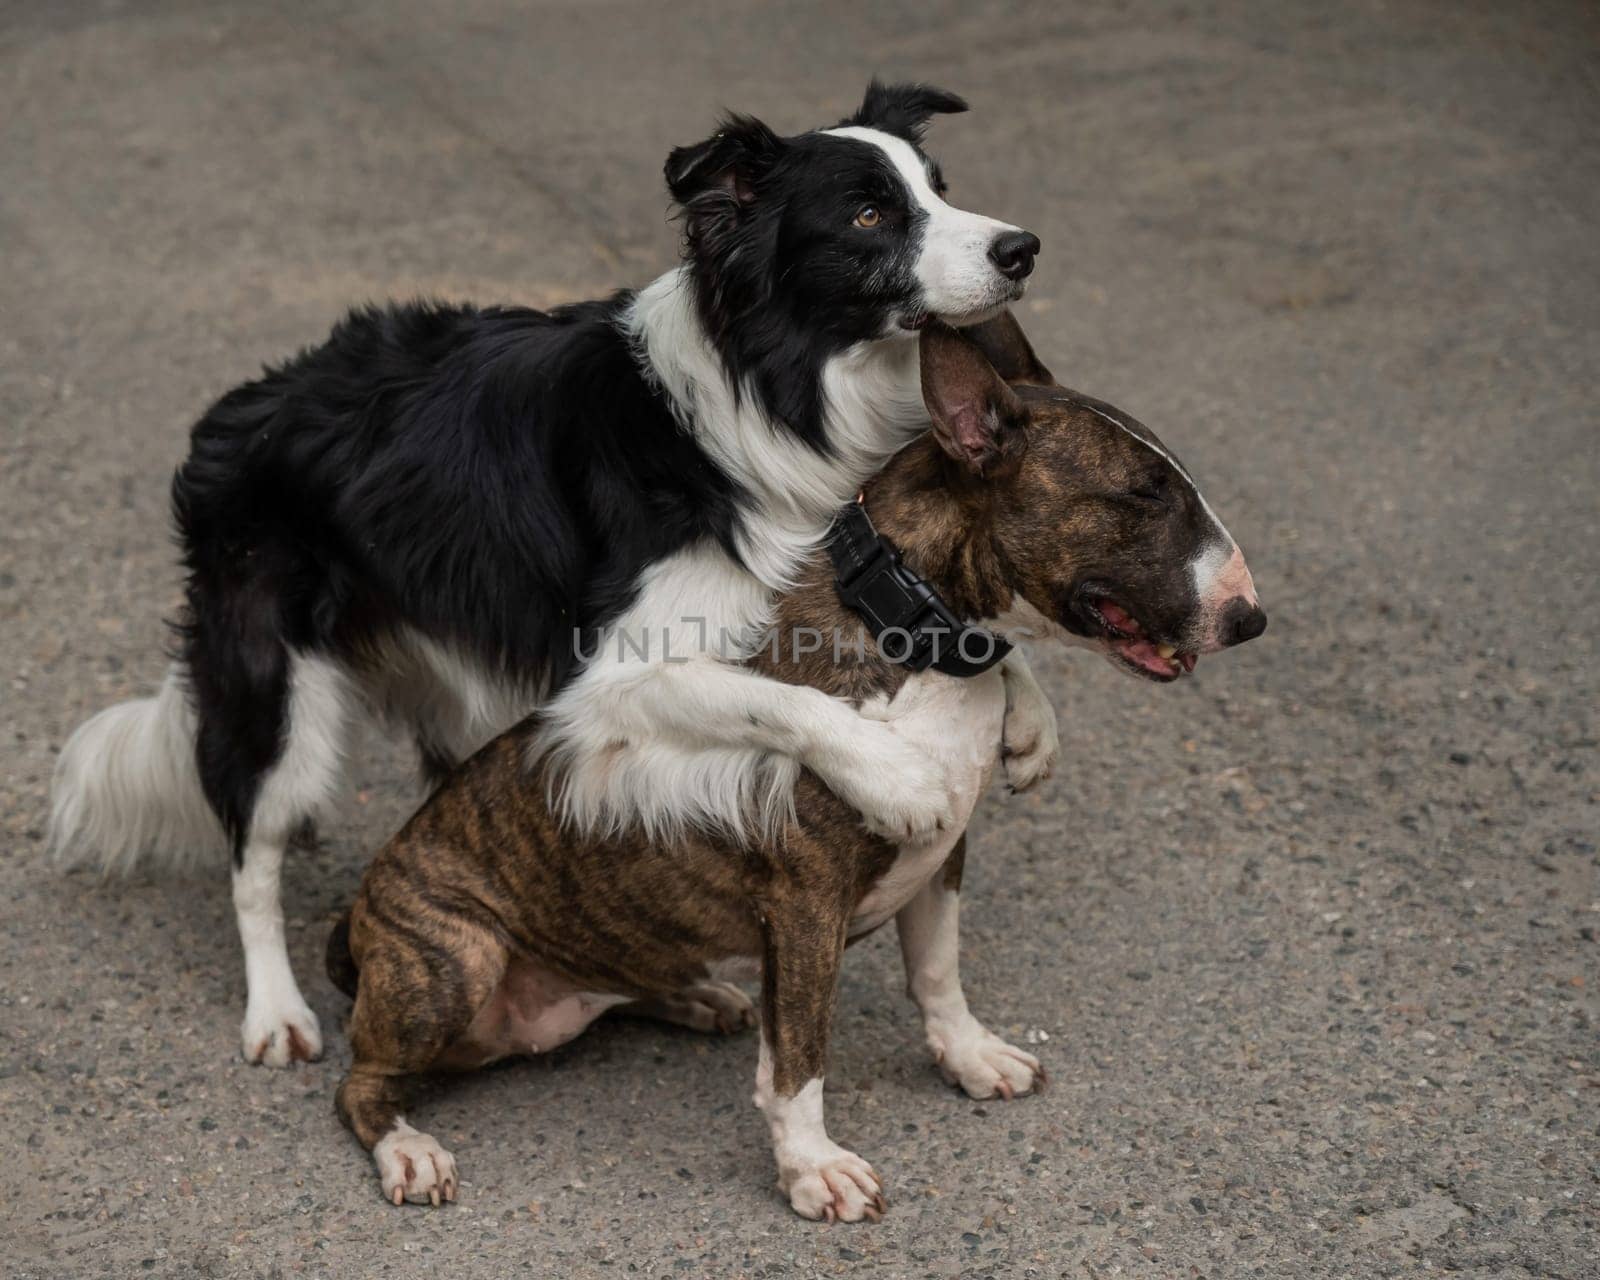 Black and white border collie hugging a brindle bull terrier on a walk